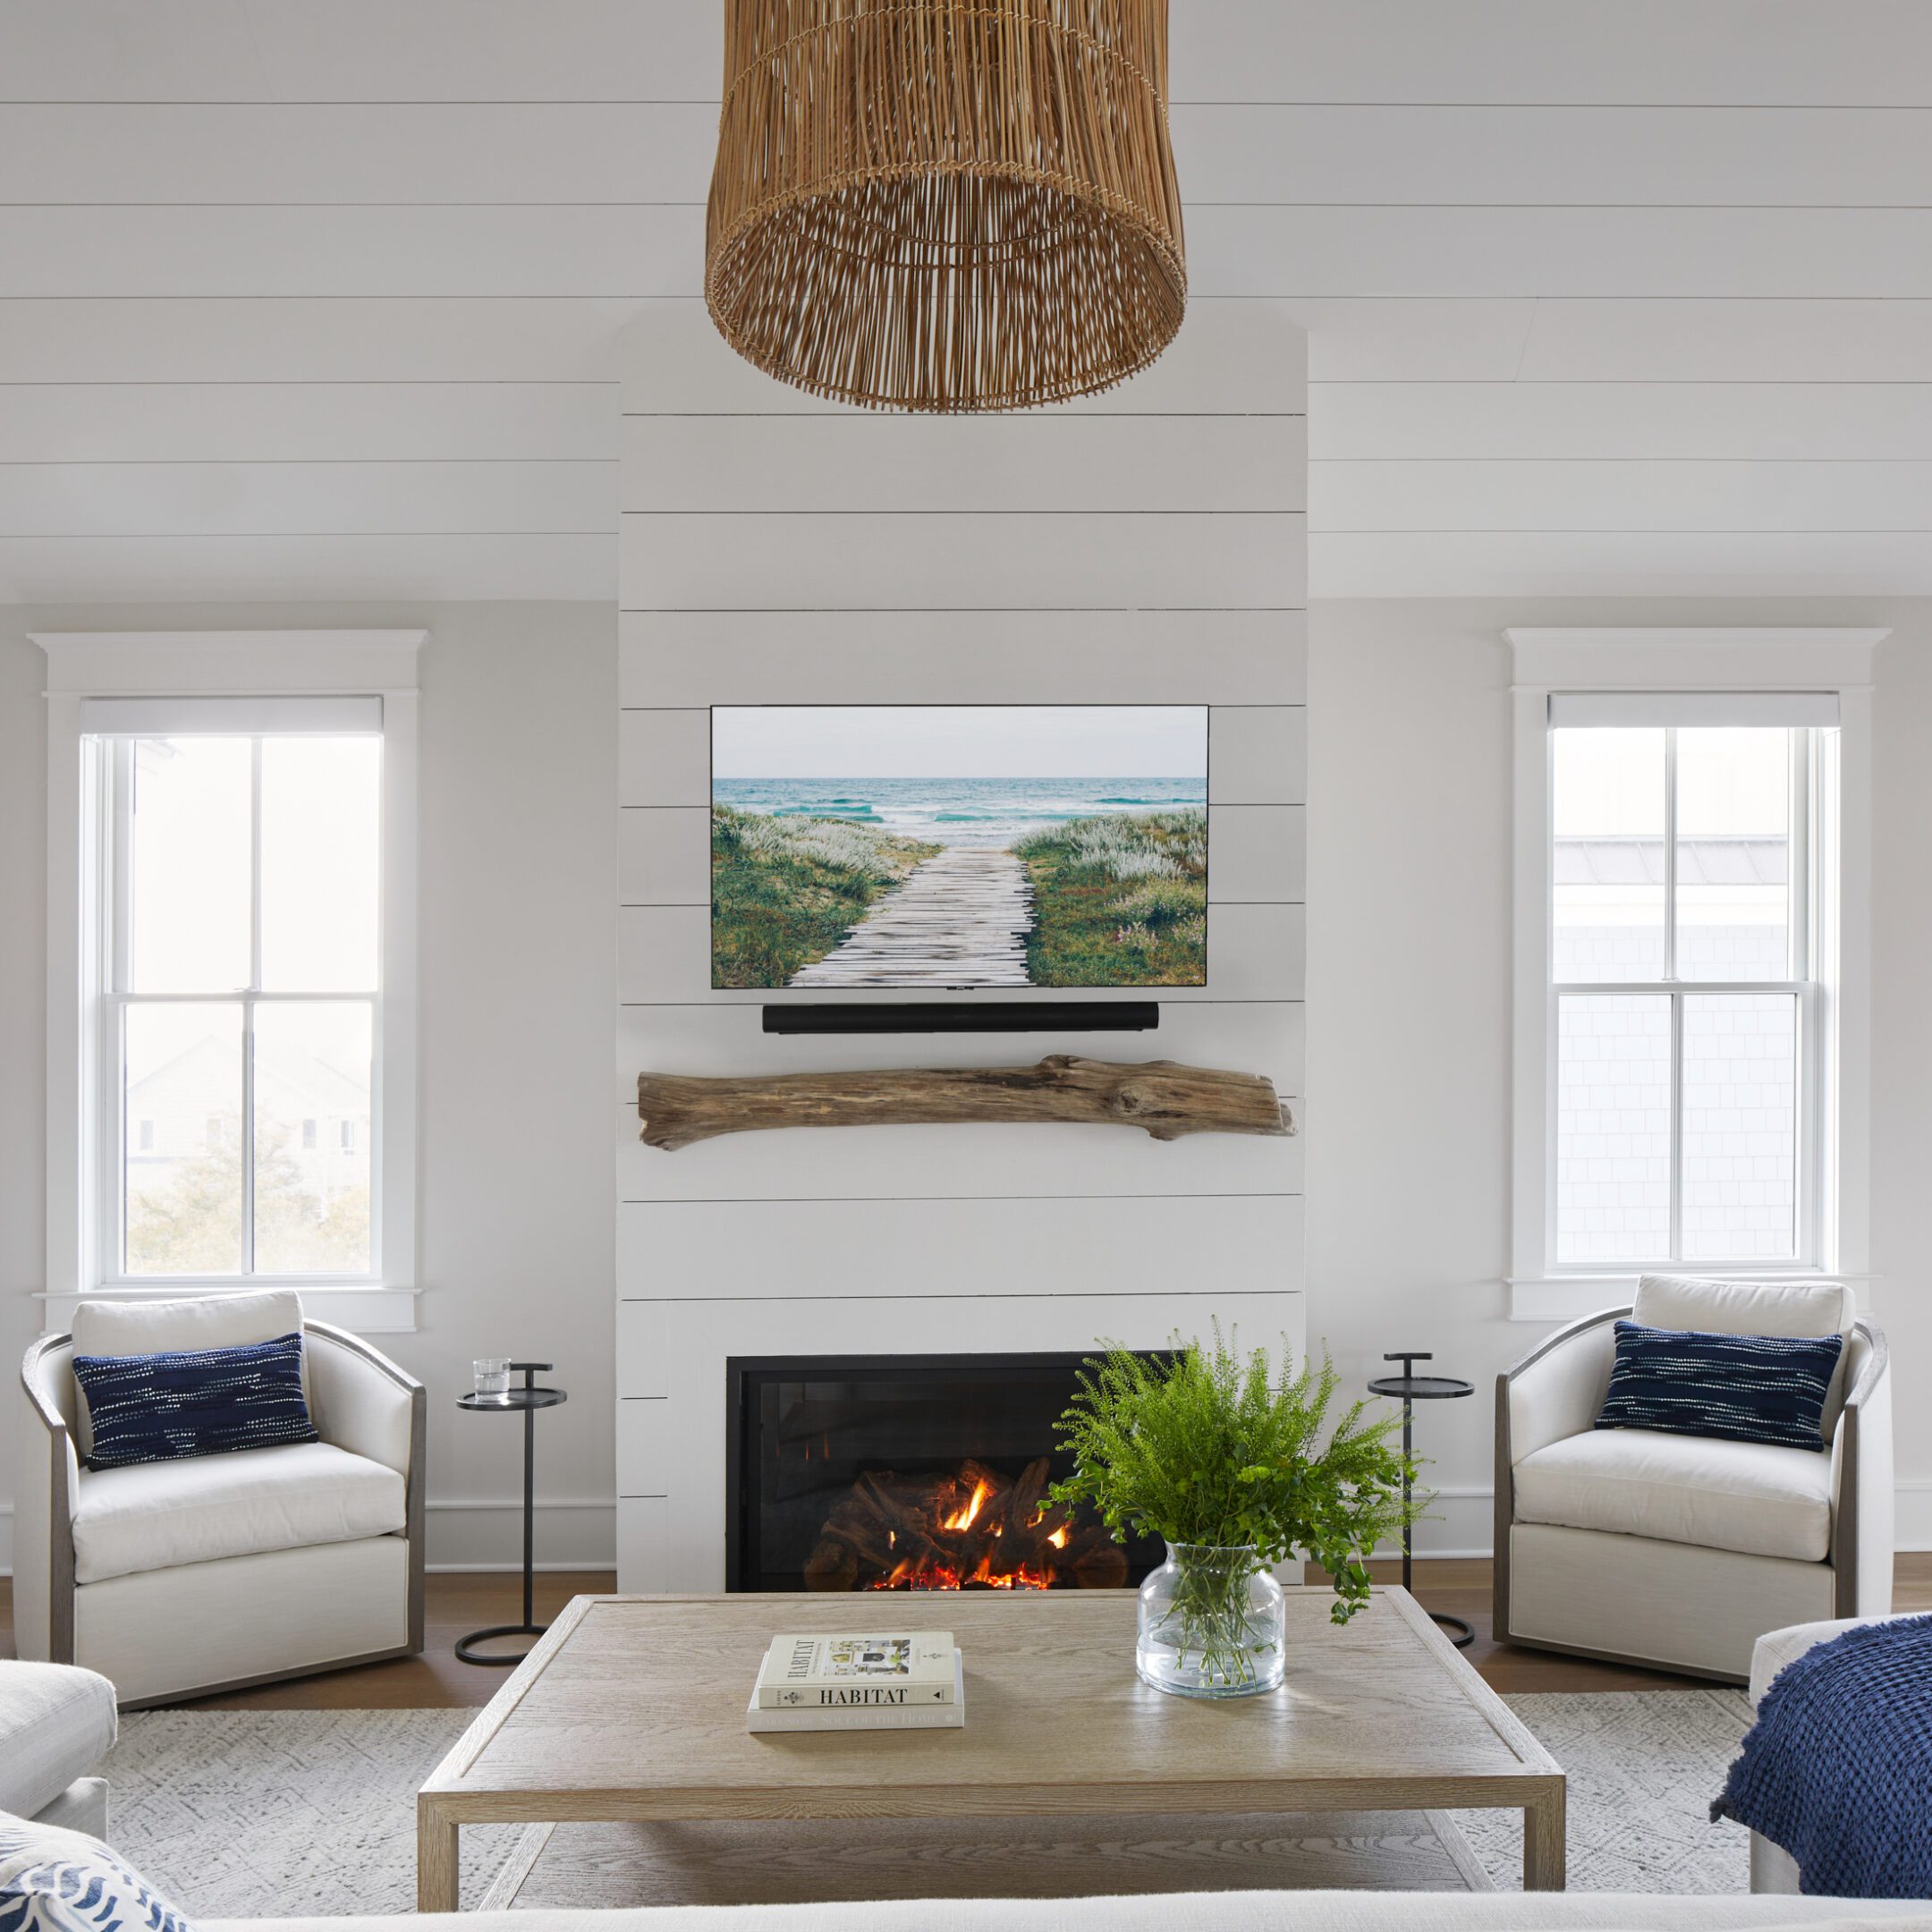 6 Fun Beach House Elements to Inspire Your Beach House